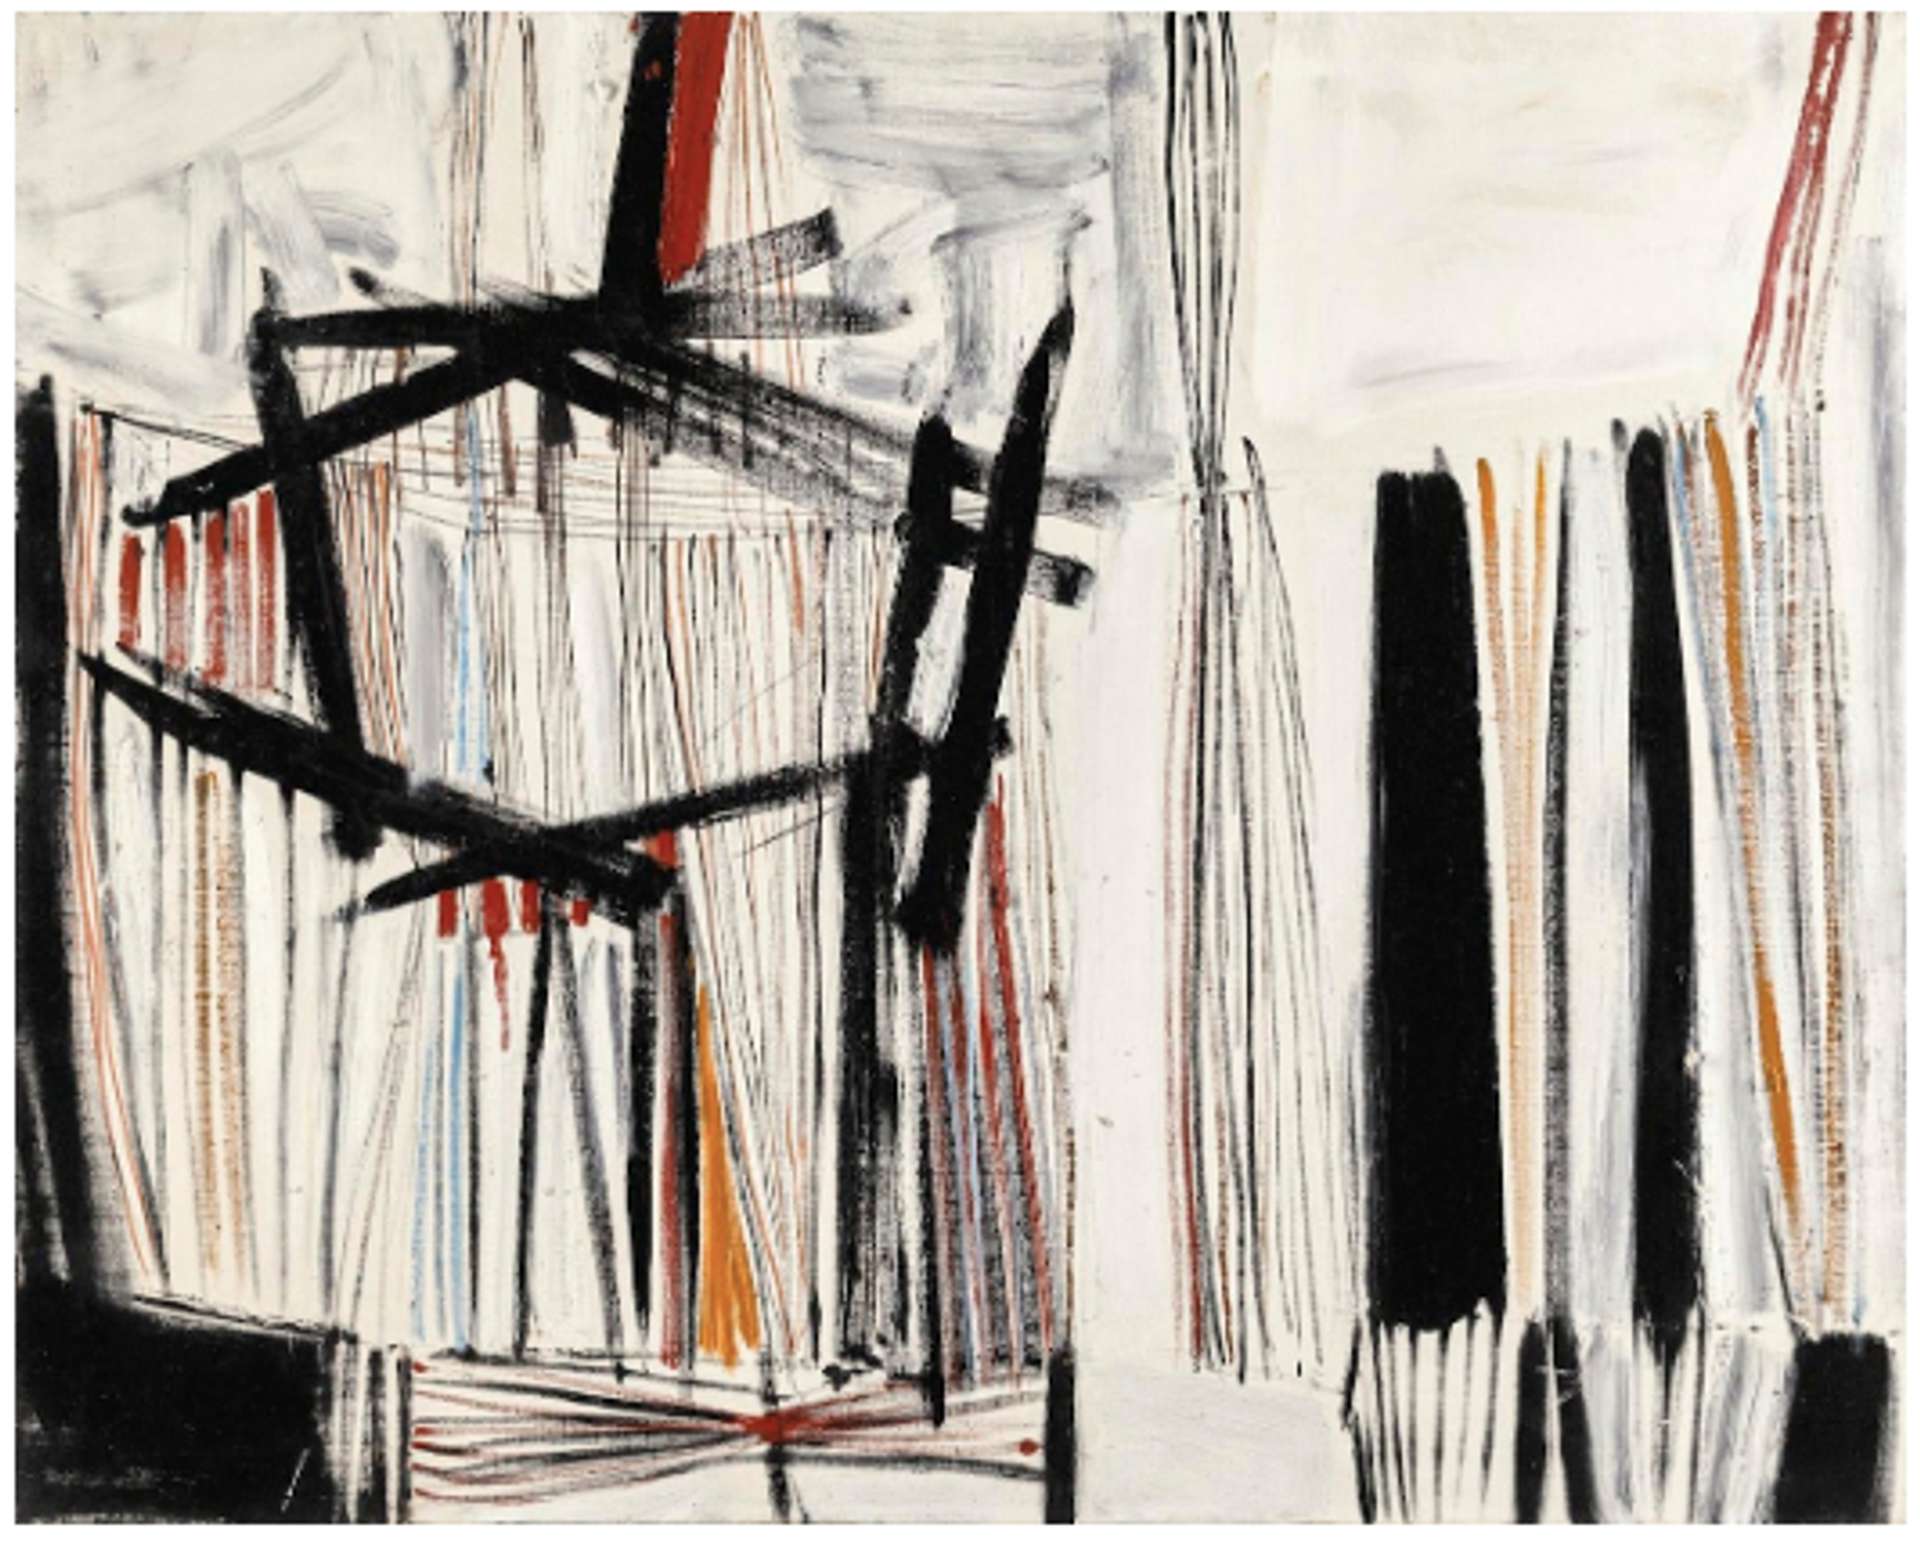 An abstract painting with horizontal lines of varying thickness spanning the entire composition. Interrupting the lines are abstract geometric shapes positioned in the center of the canvas and near the bottom edge.